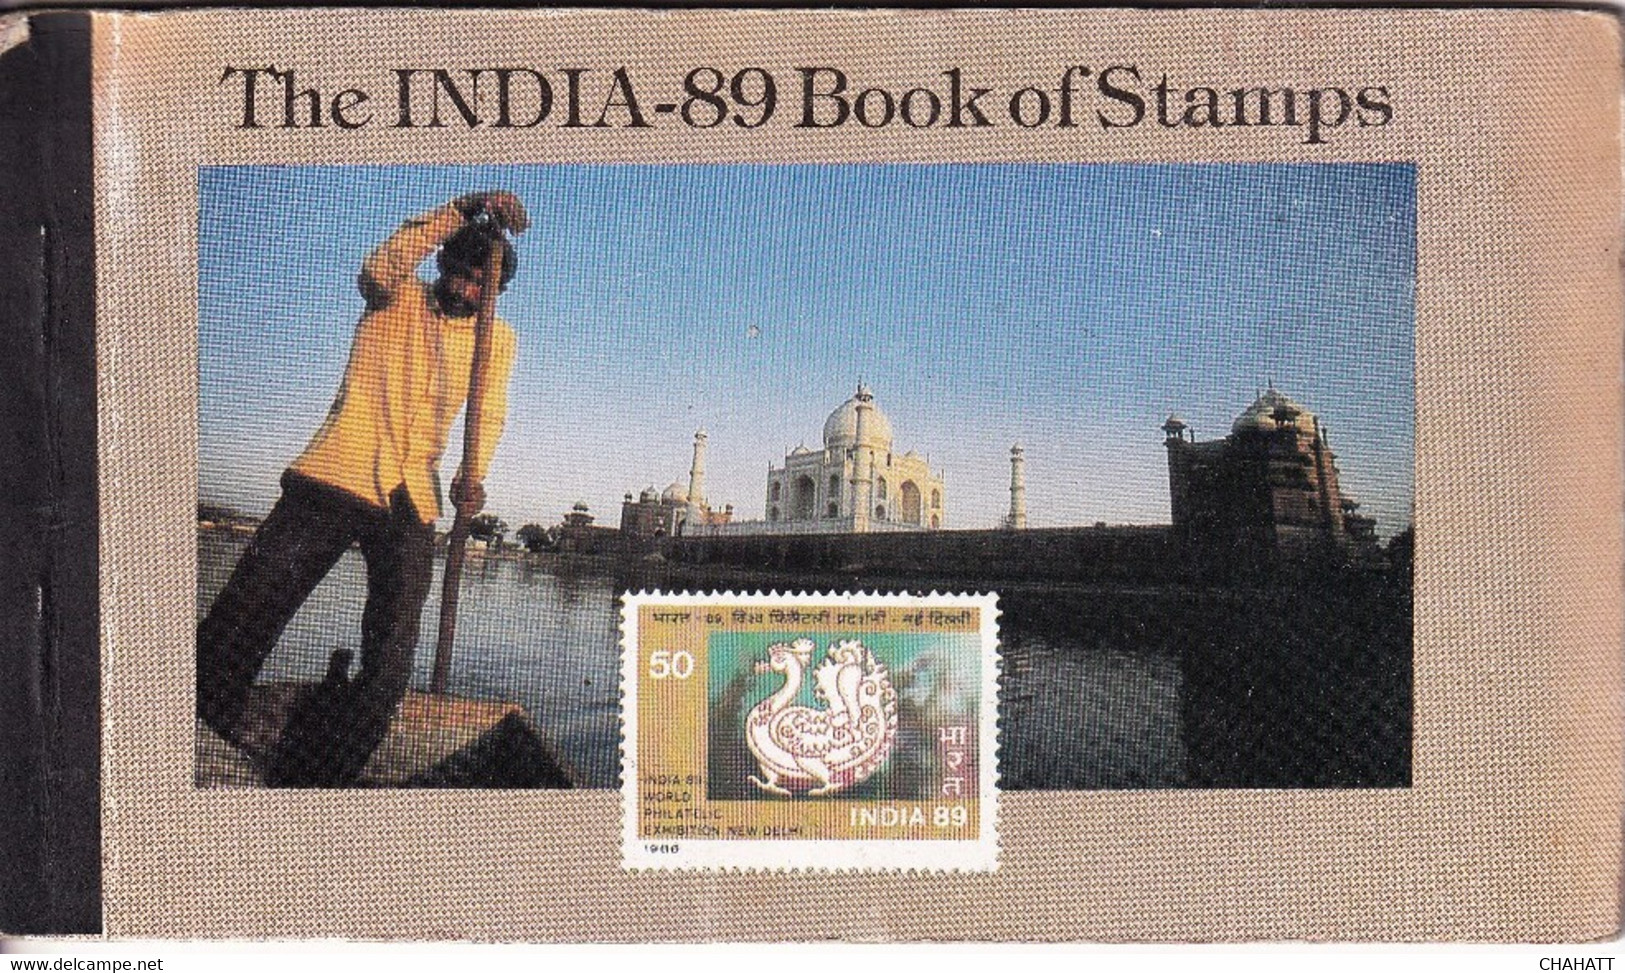 INDIA -89- BOOK OF STAMPS- UNEXPLODED-COMPLETE WITH SHEETLETS- REPRINTED STAMPS-MNH-SCARCE-BX2-38 - Collections, Lots & Series